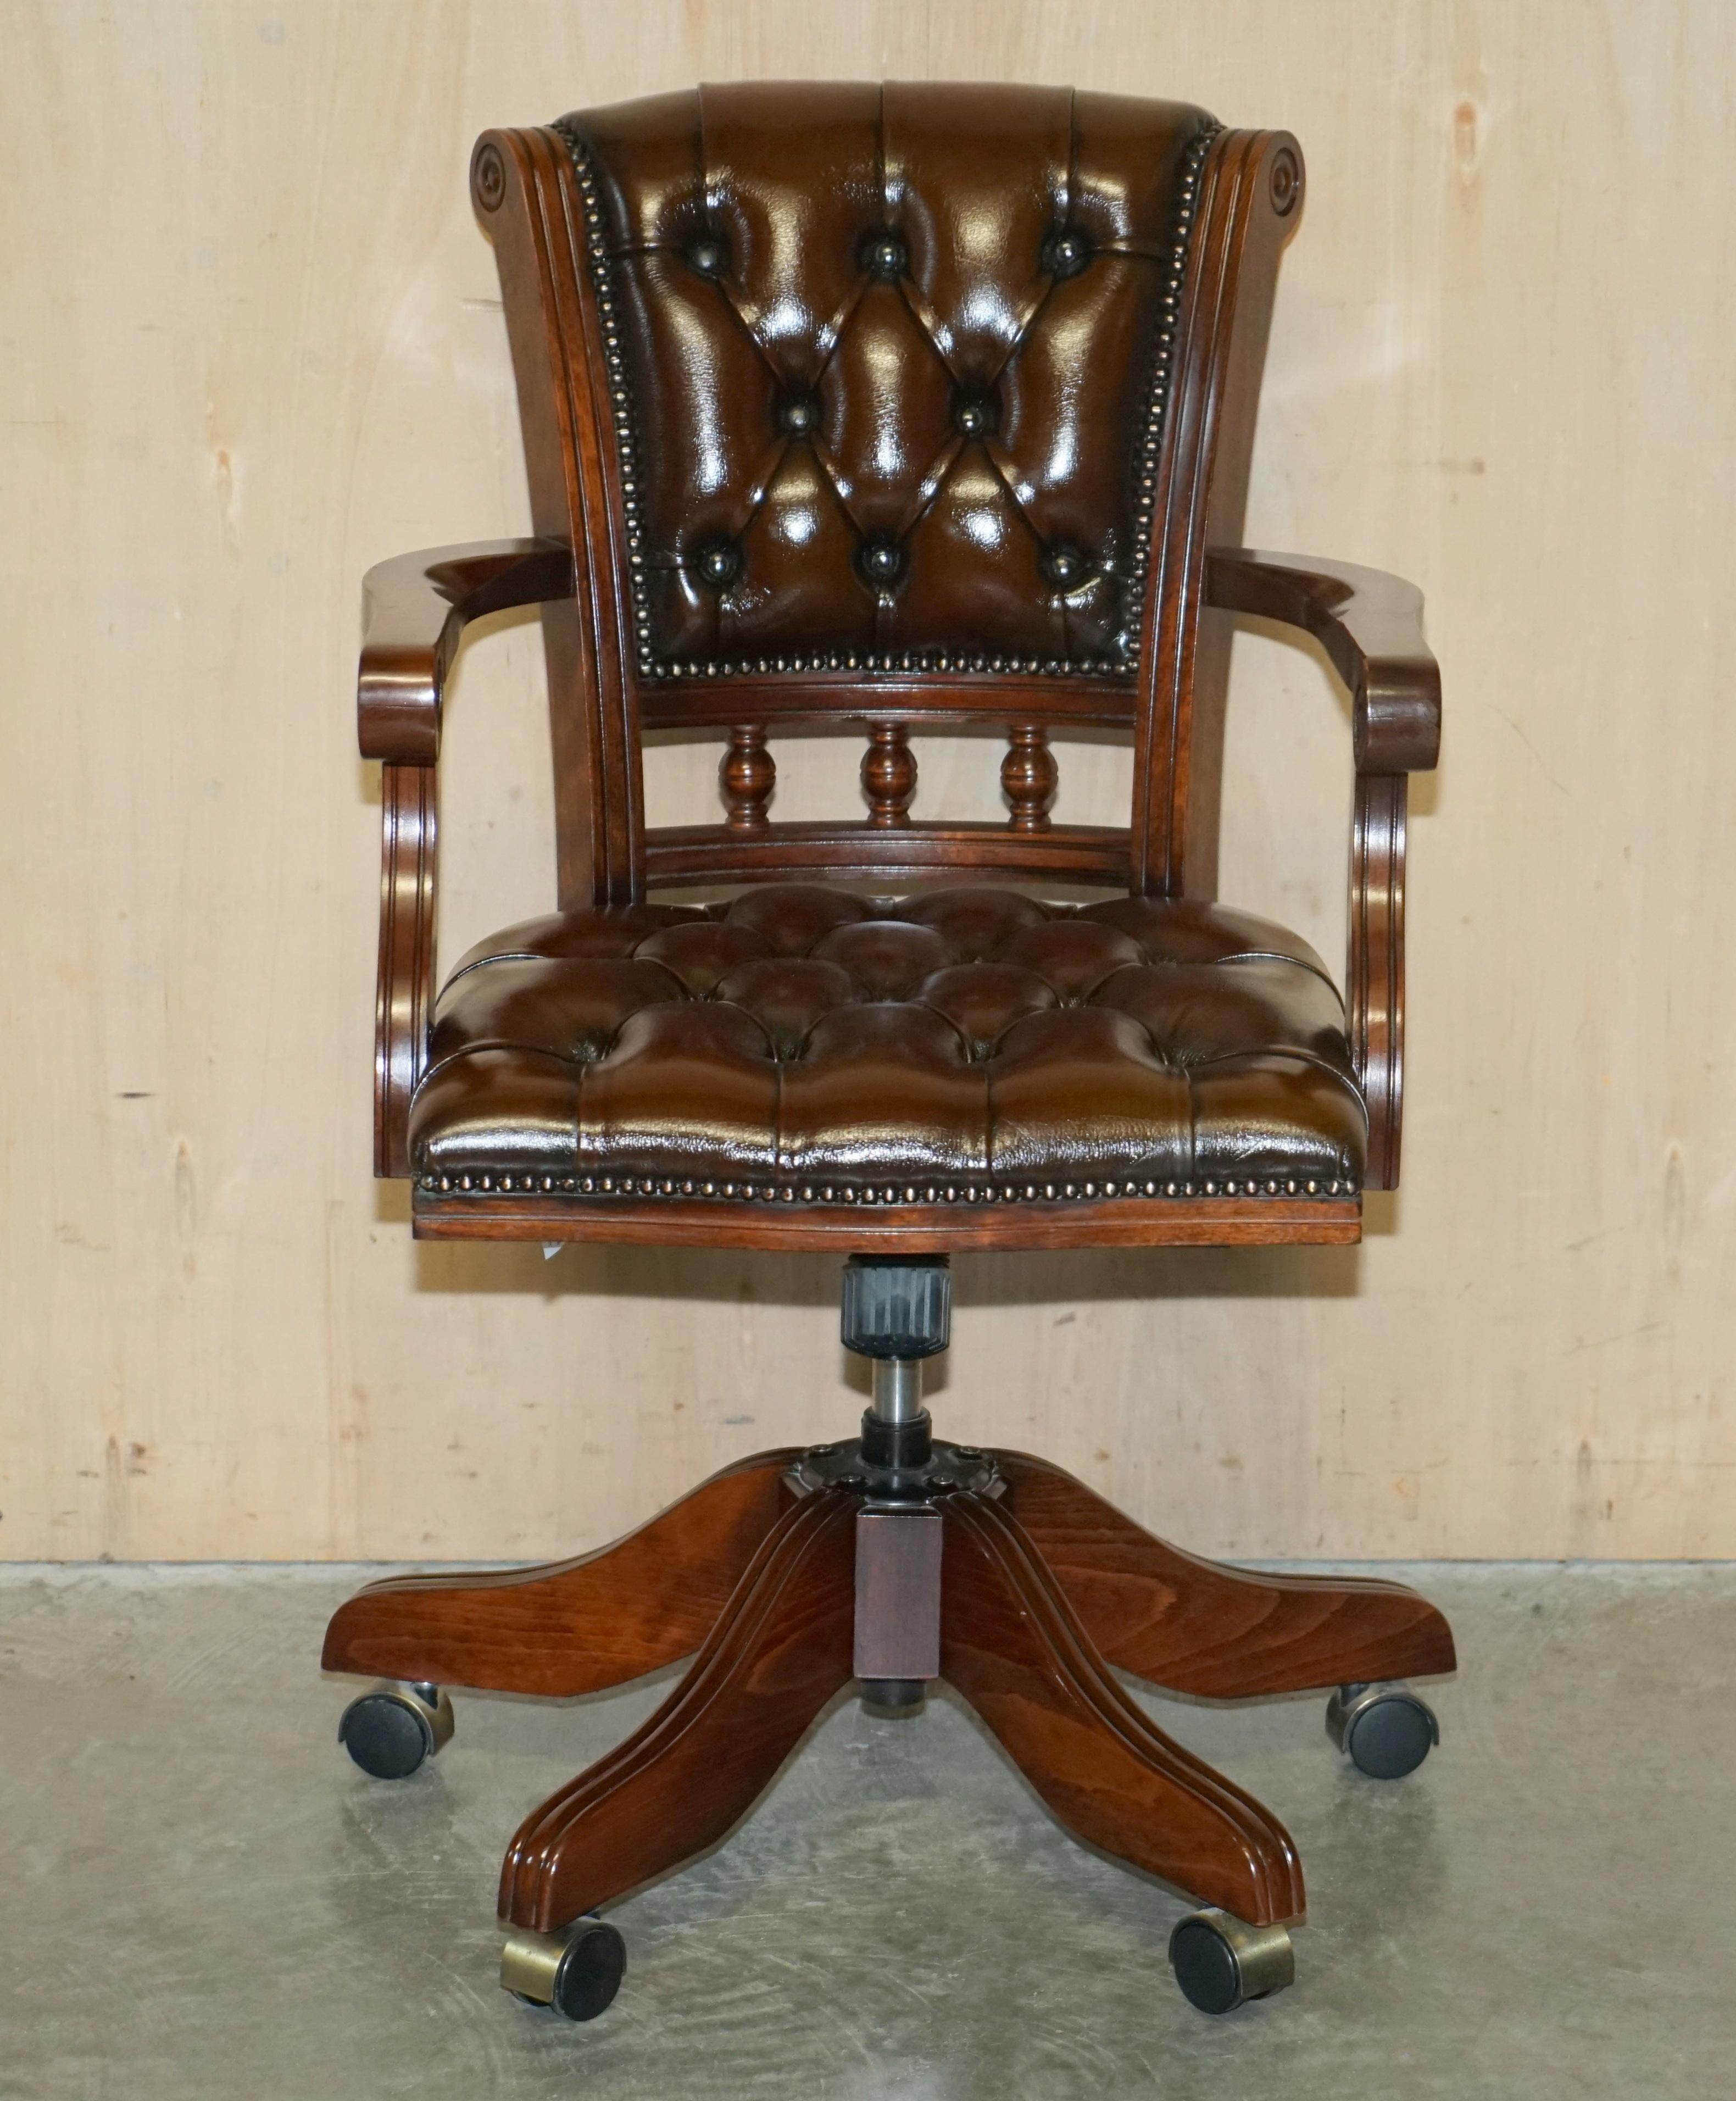 We are delighted to offer for sale this lovely fully restored original beech framed vintage hand dyed Chesterfield cigar brown leather directors chair

A very good looking well made and comfortable directors chair, the chair has a gas lift base